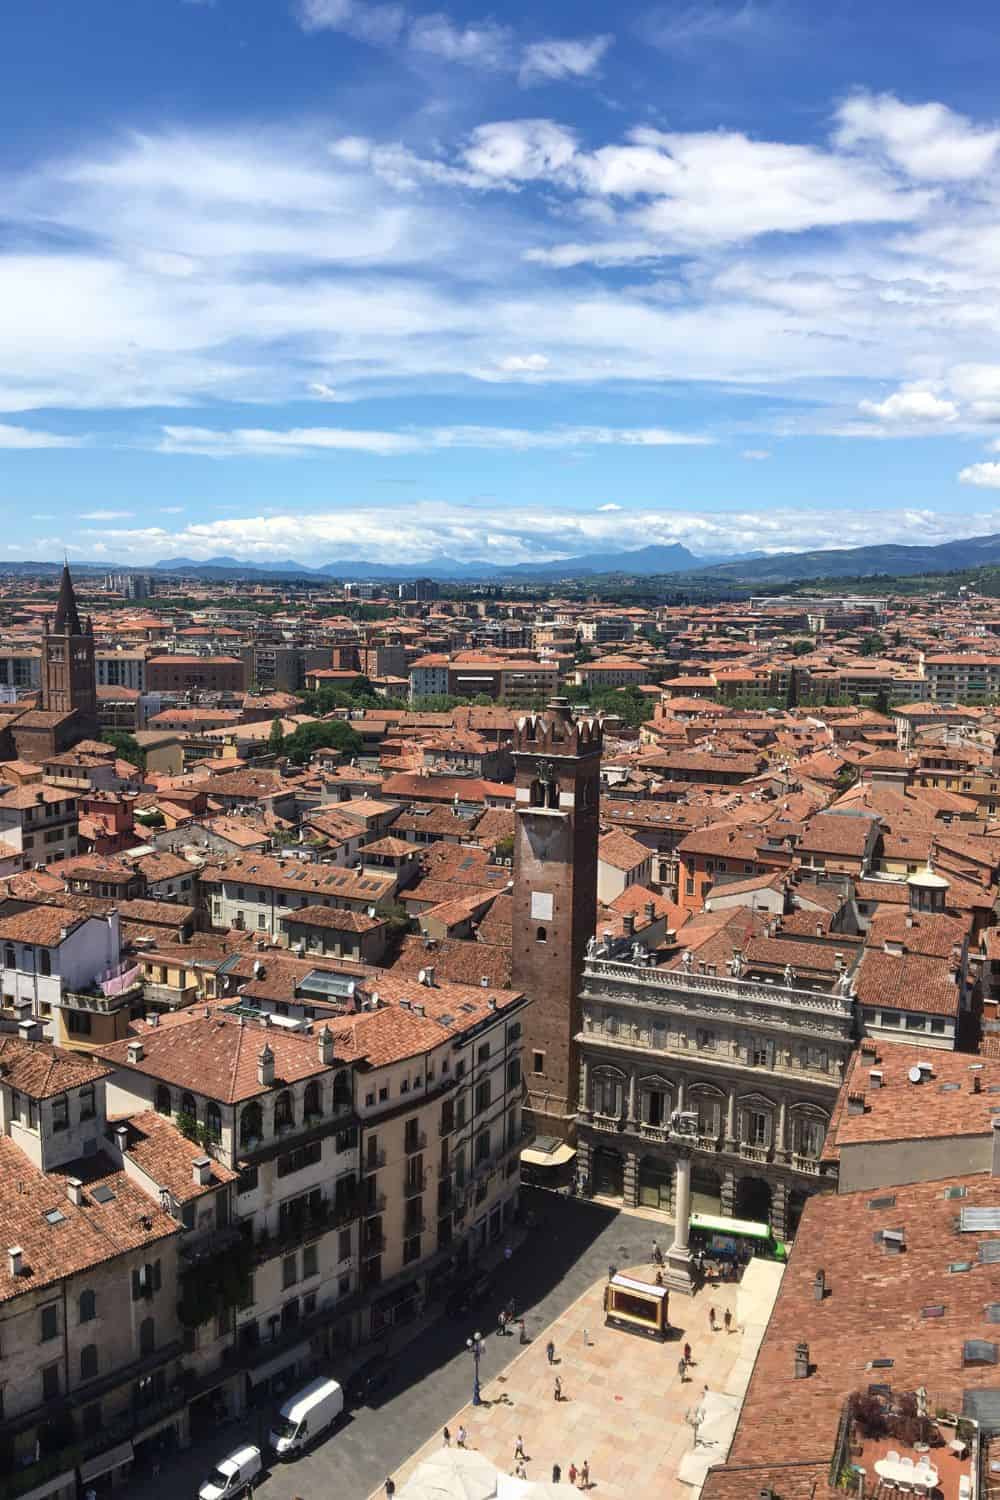 A view of Piazza delle Erbe from the top of Torre dei Lamberti